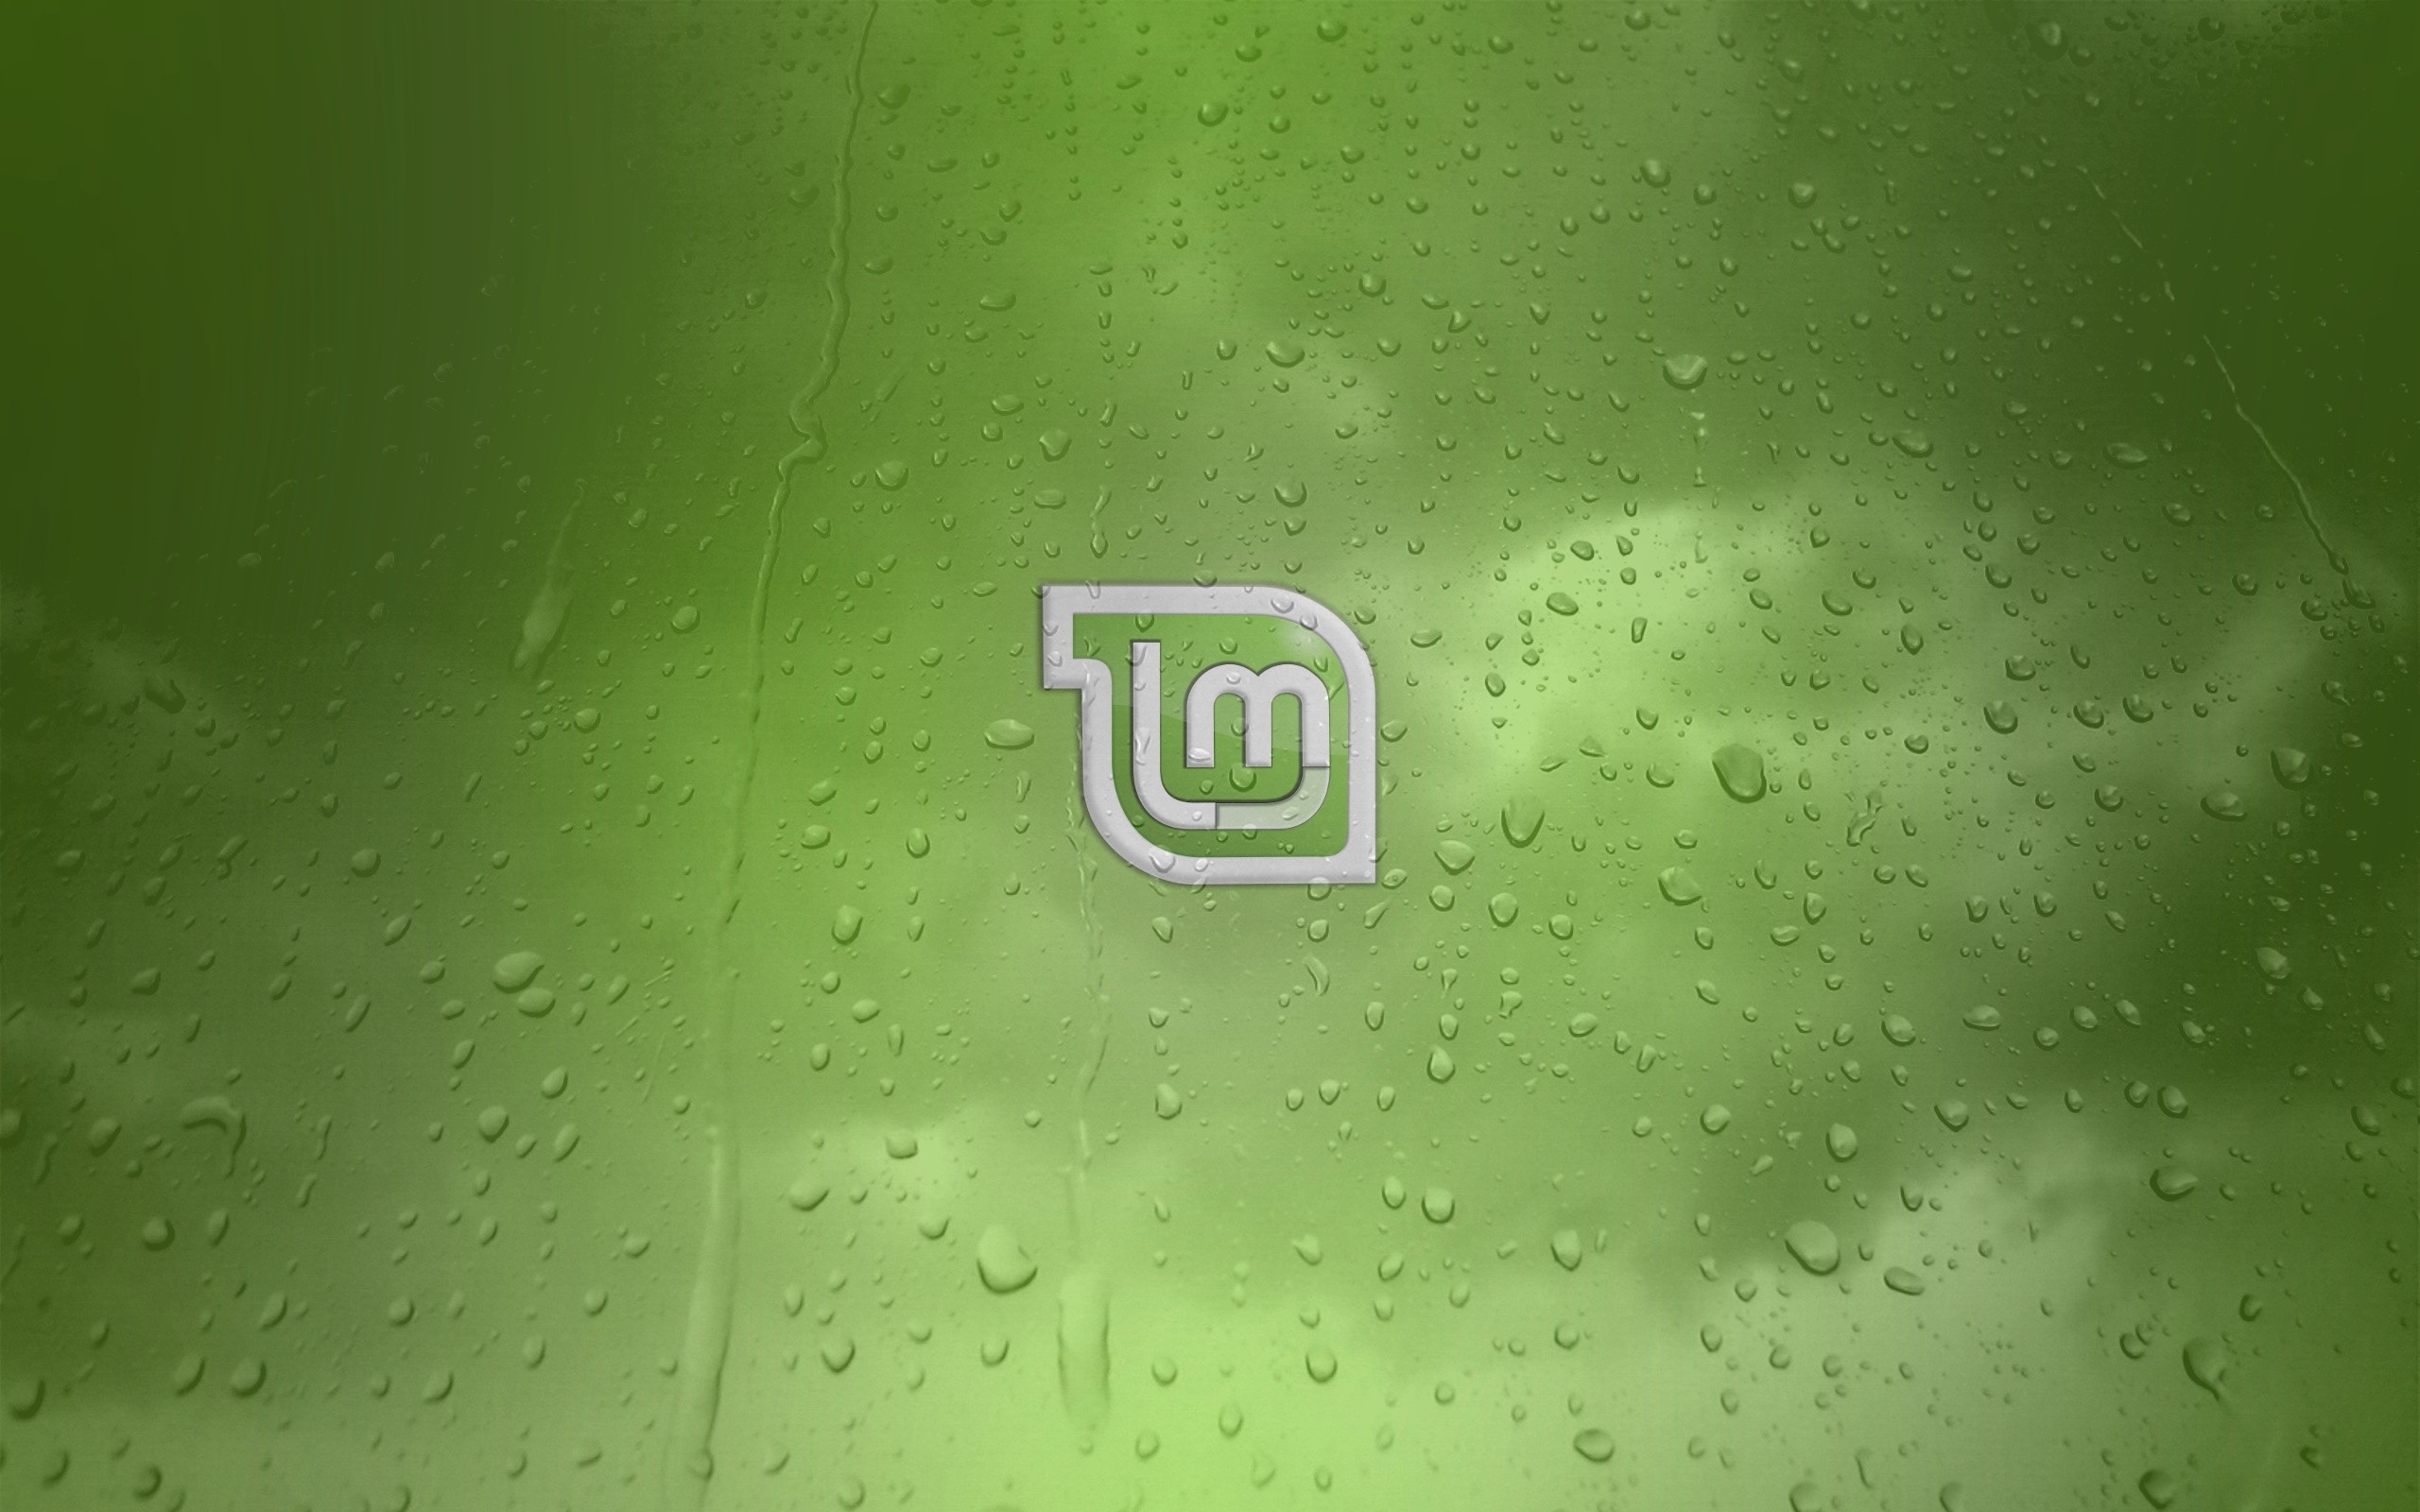 General 2560x1600 logo green background water drops Linux Mint operating system